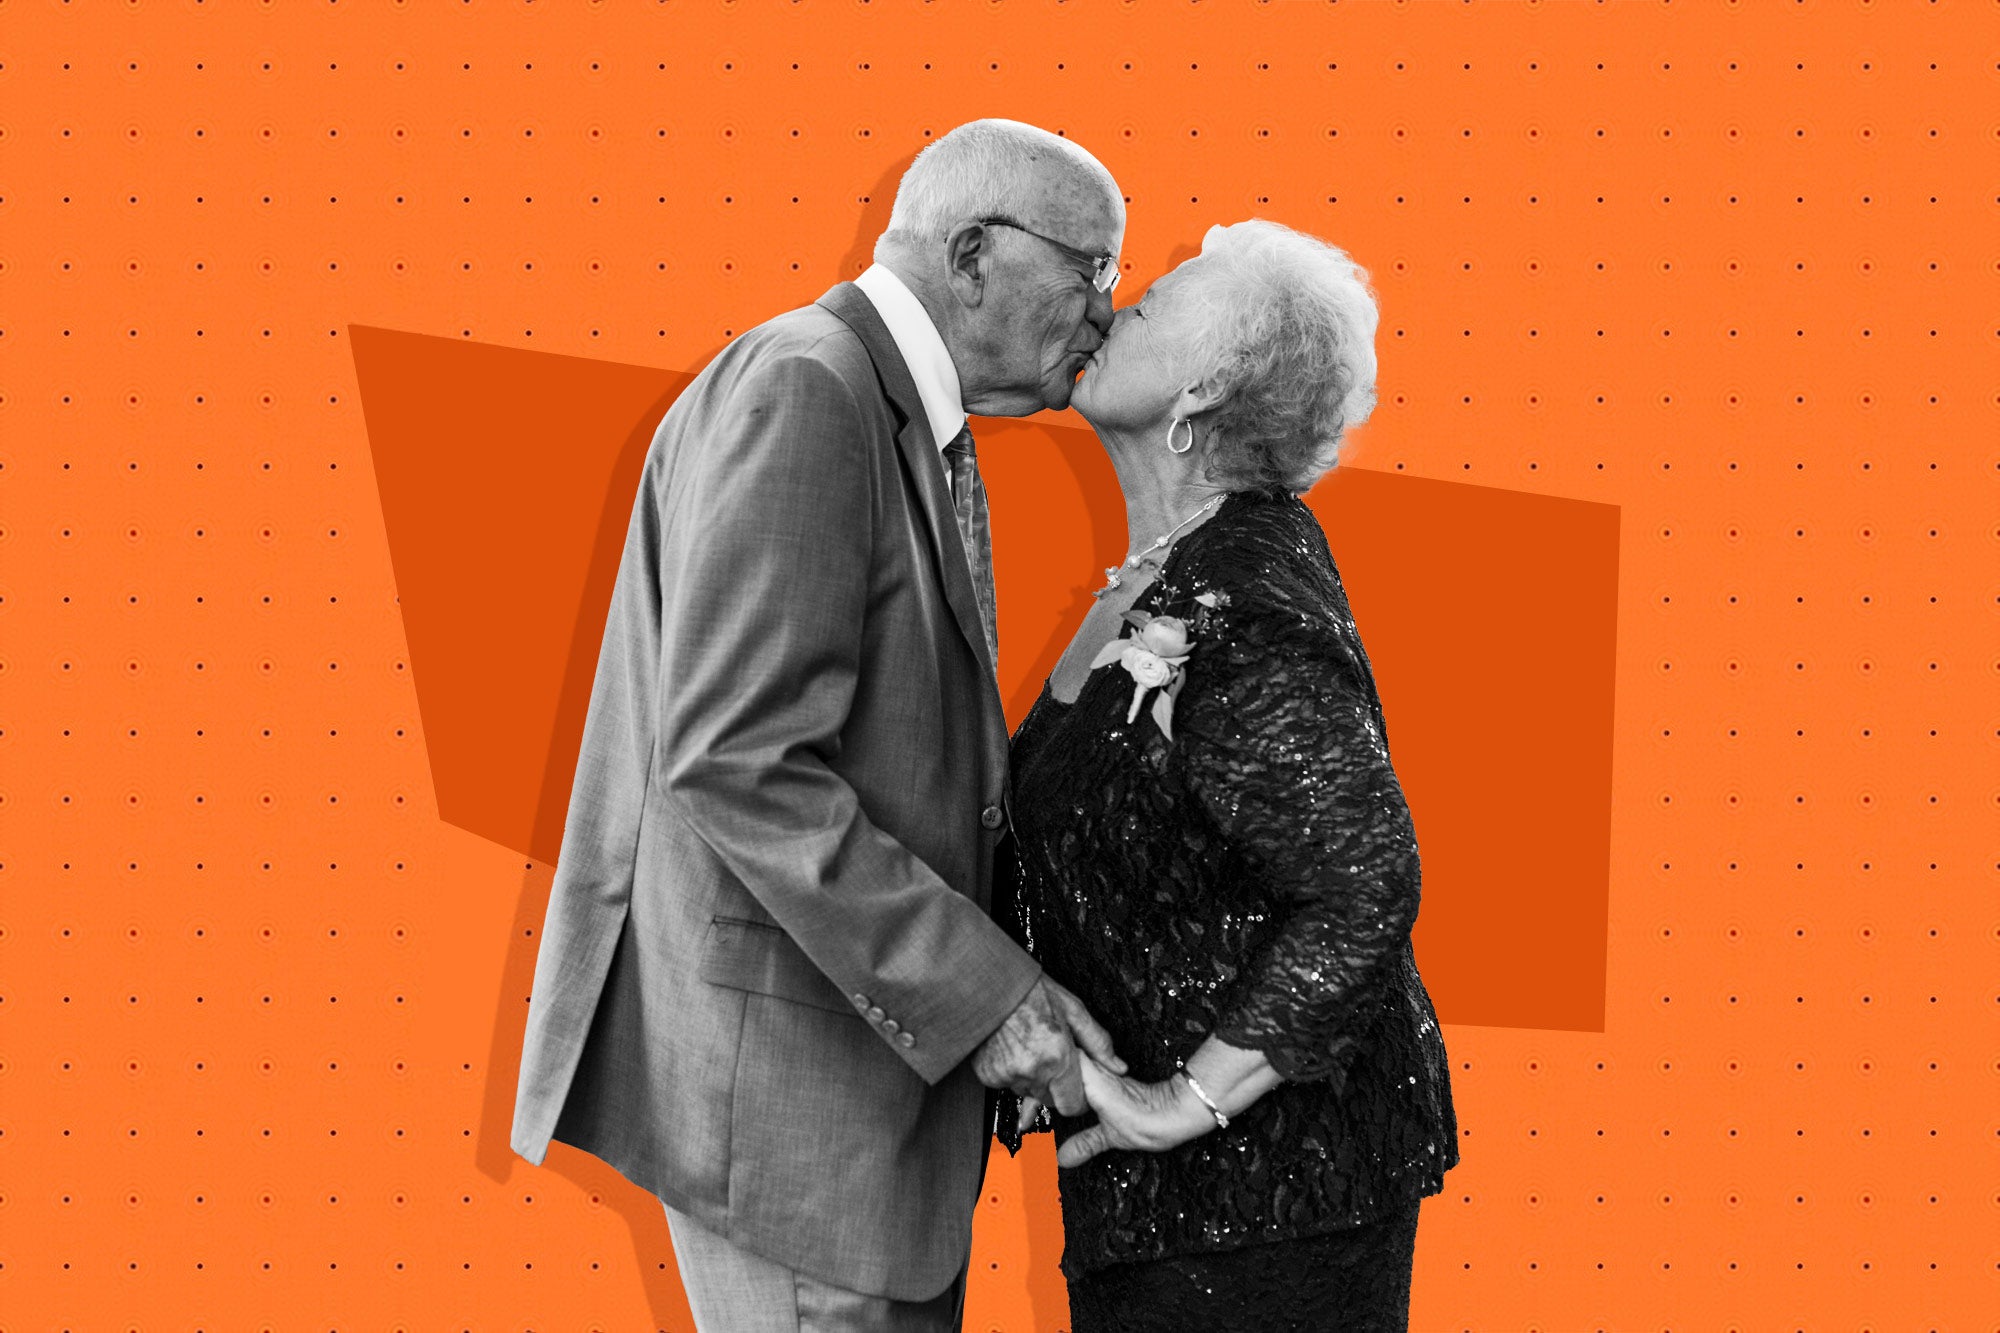 An older couple kisses on the lips in front of an orange dotted background.